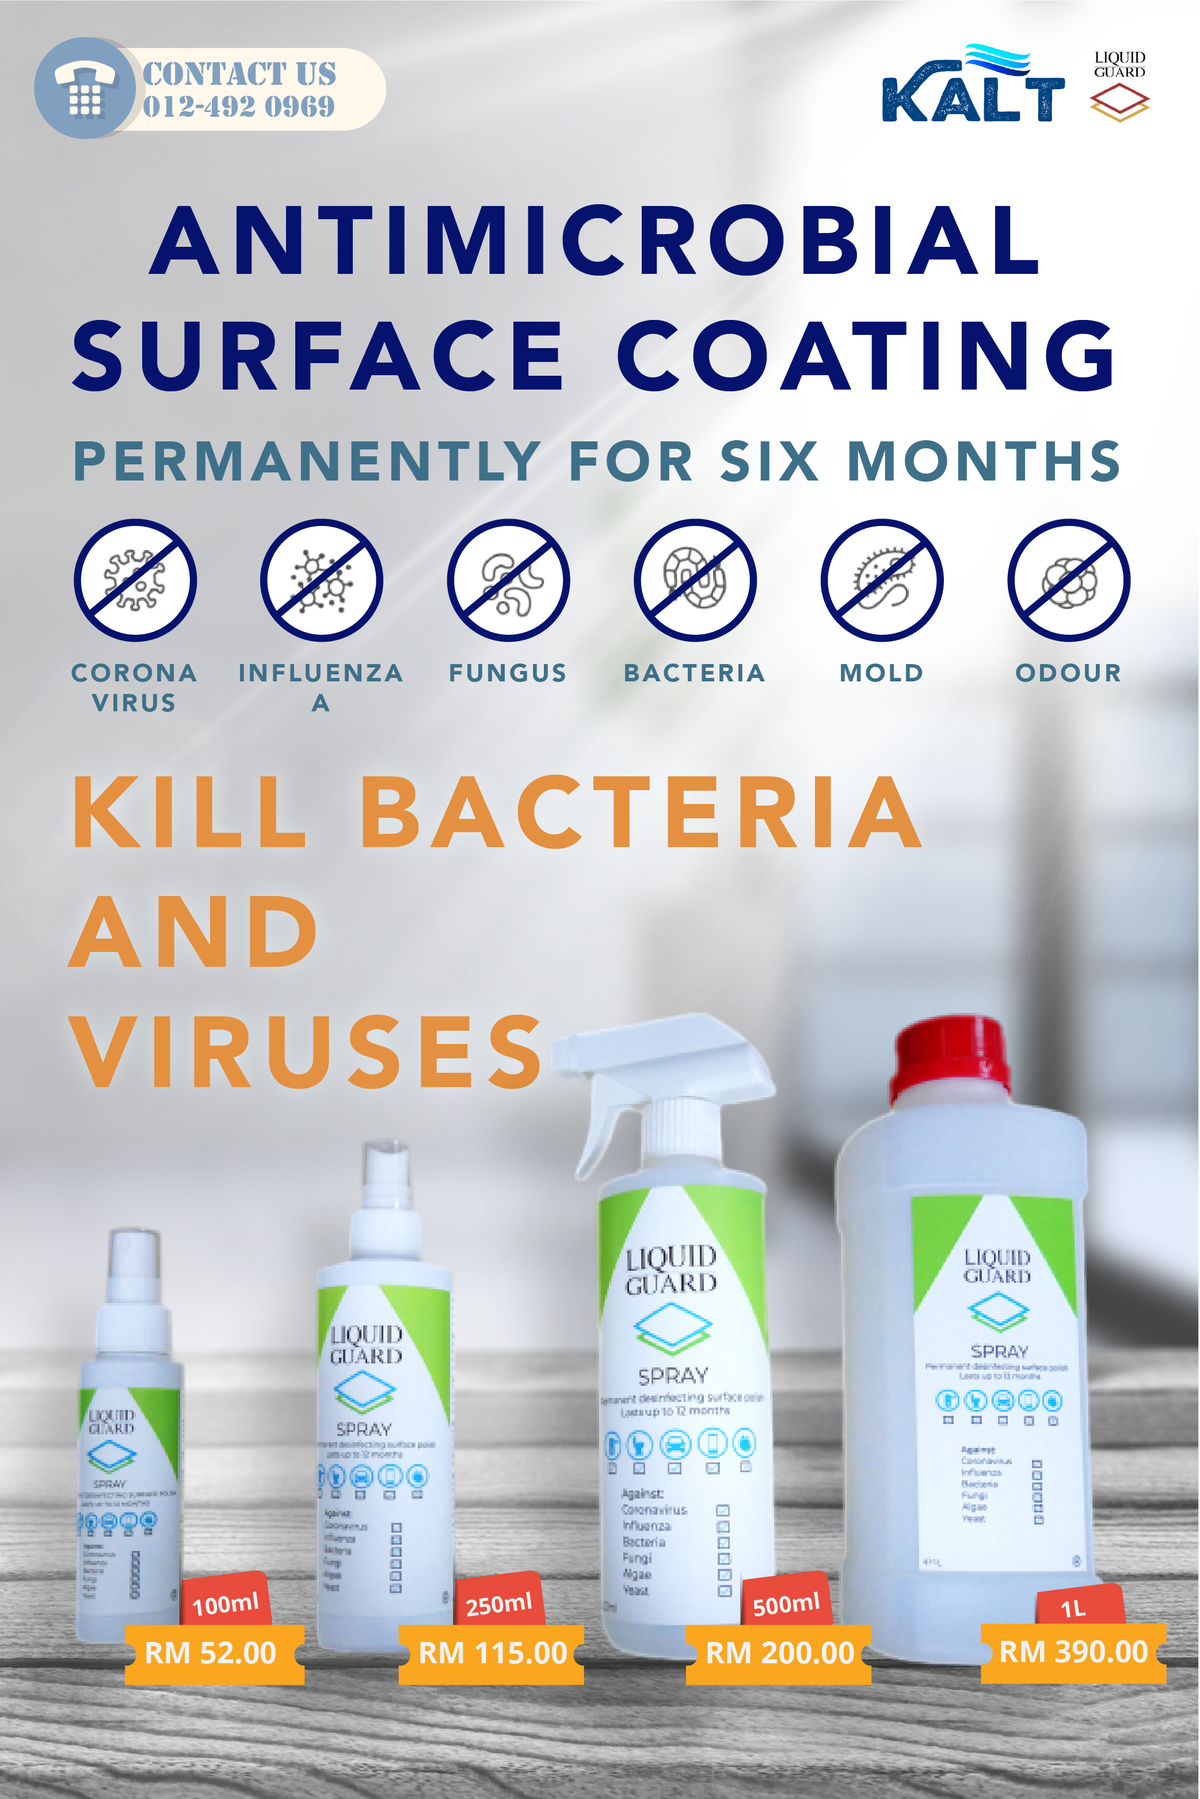 Antimicrobial Surface Coating - Kill Bacteria and Viruses